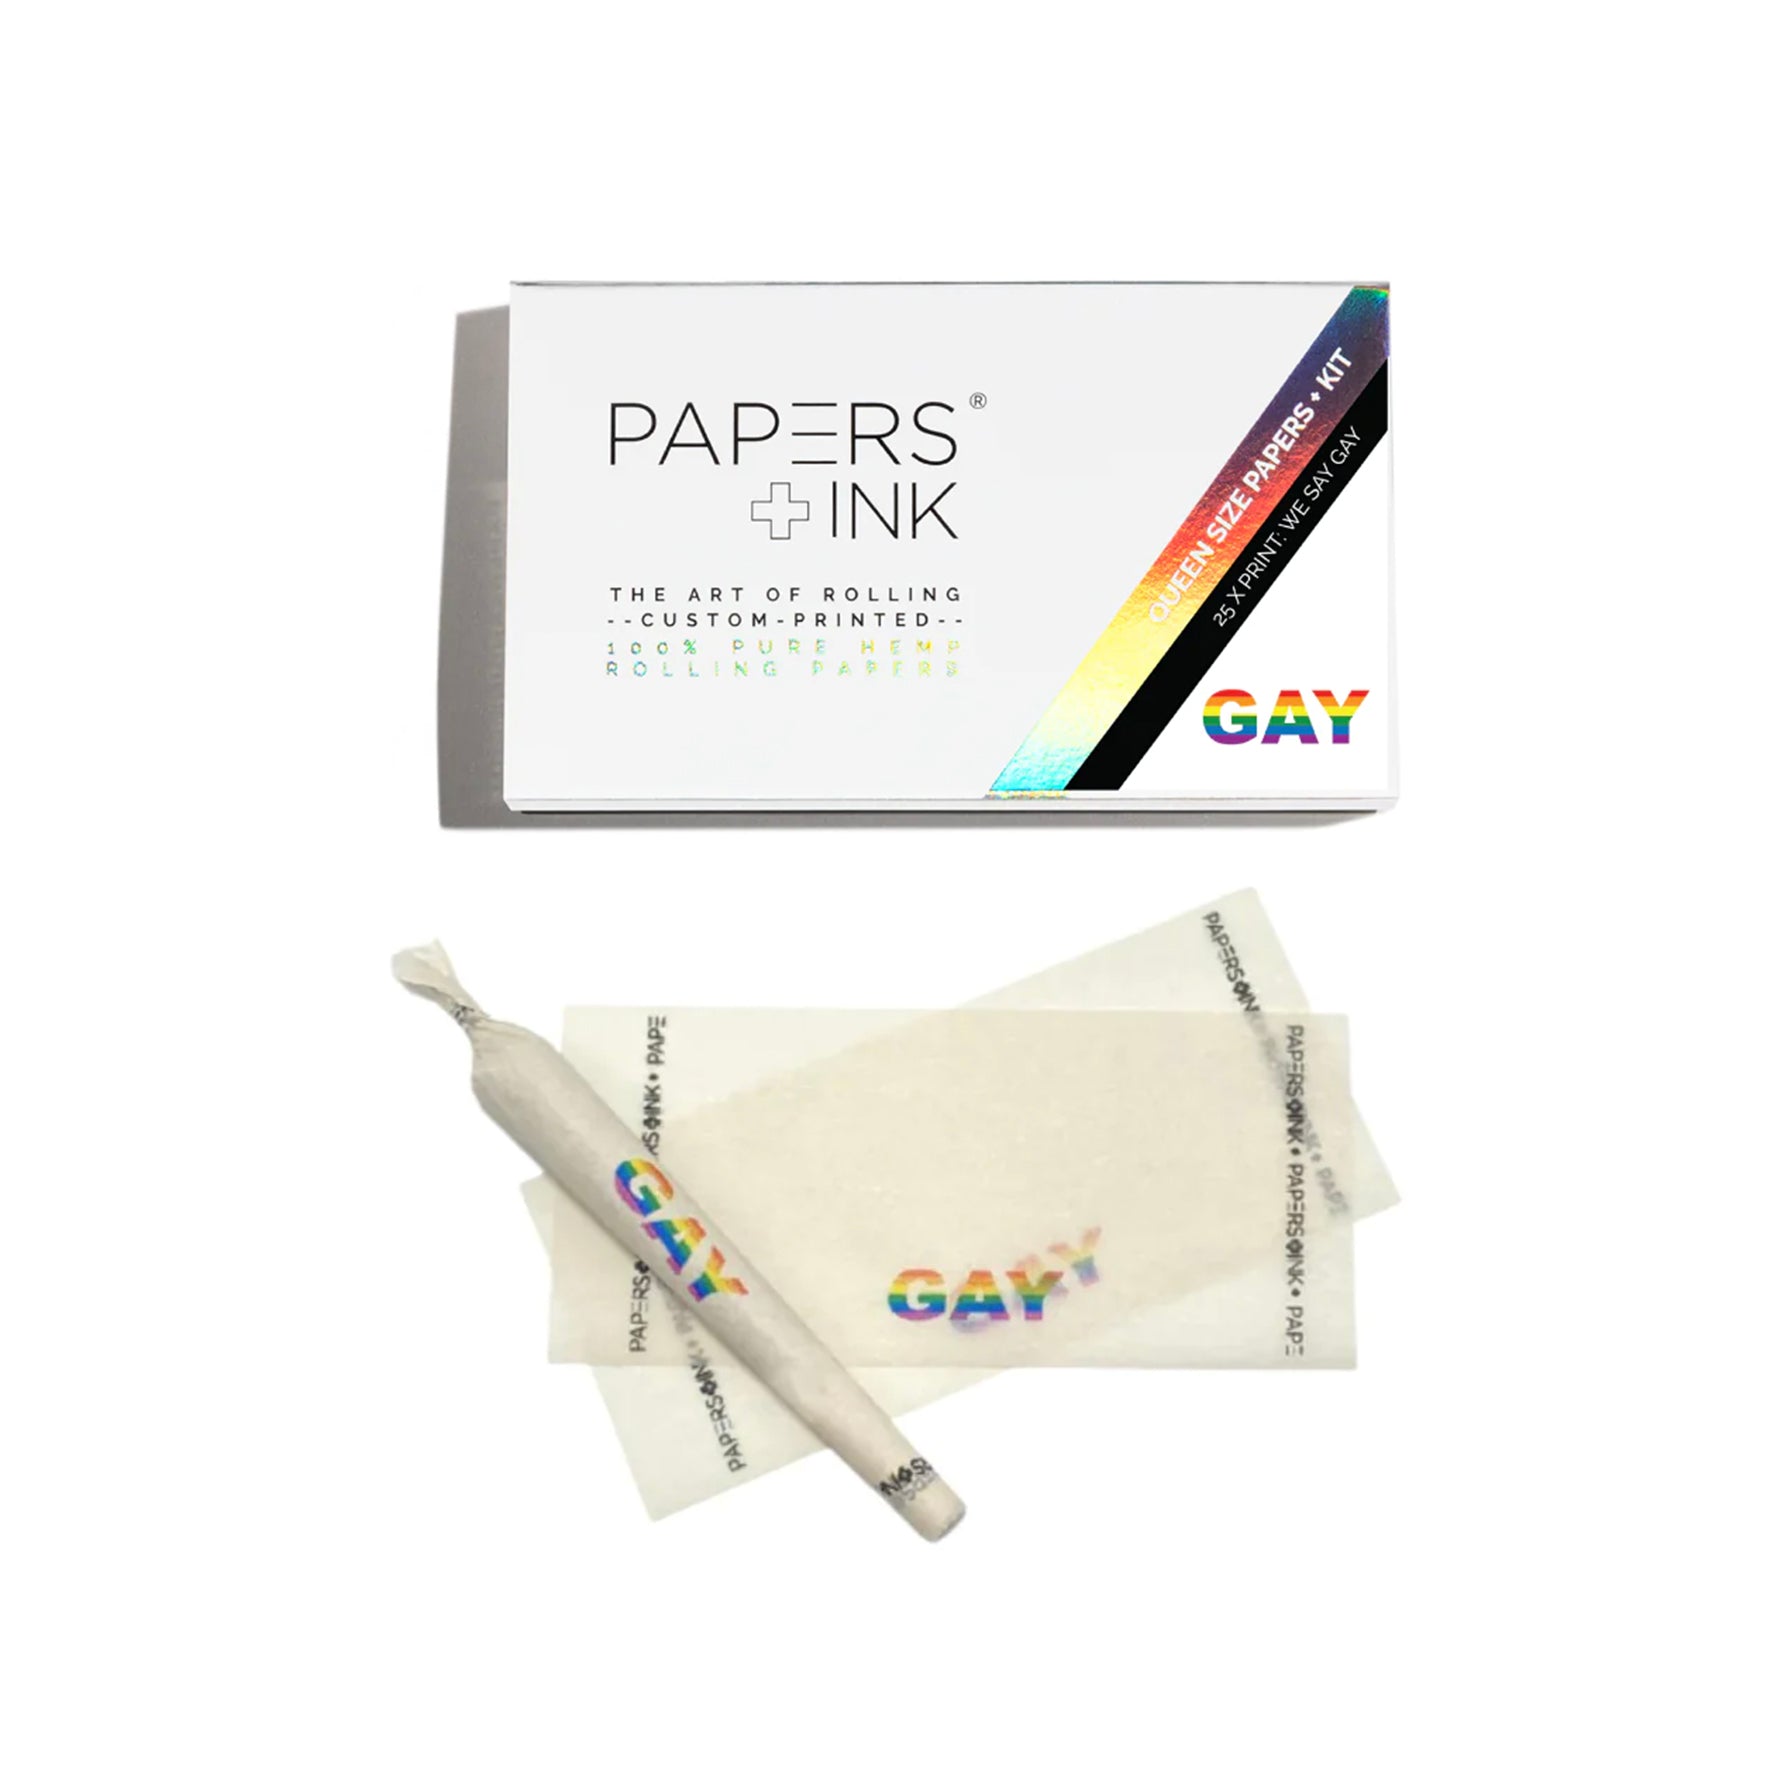 papers&ink, we say gay ,papers, joint papers, rolling papers, colored papers, farbige blättchen, bedruckte blättchen, Kingsize, 1 1/4, papes, papers, OCB, Purize, Gizeh